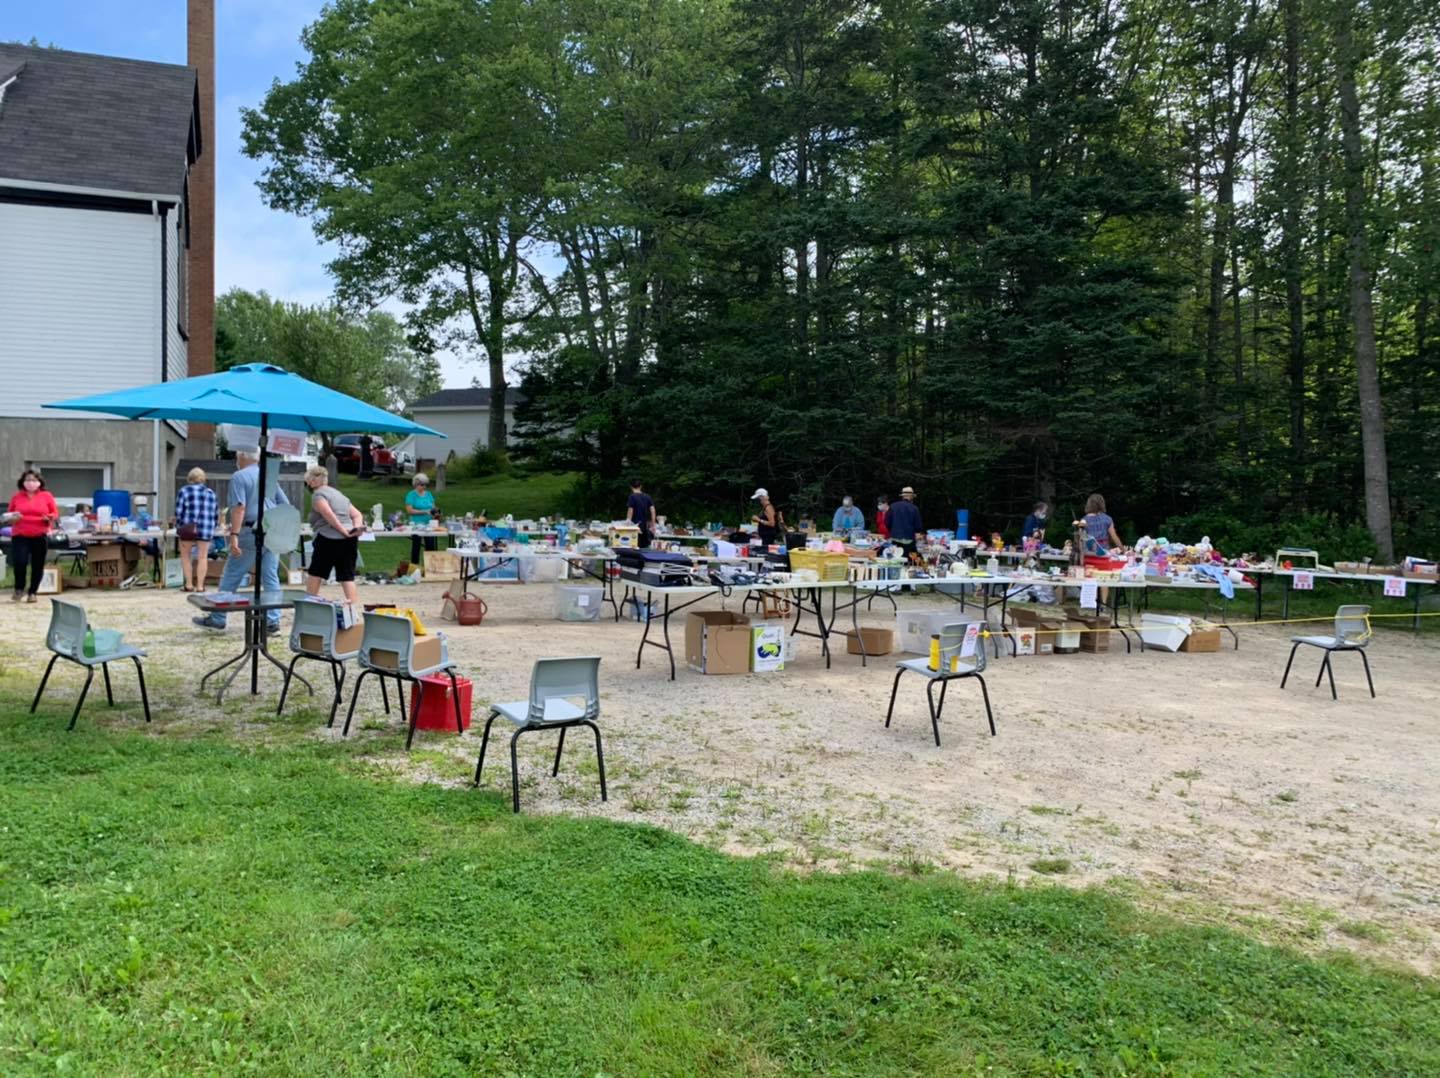 Thank you to everyone who supported our outdoor yard sale on Saturday August 7th, 2021